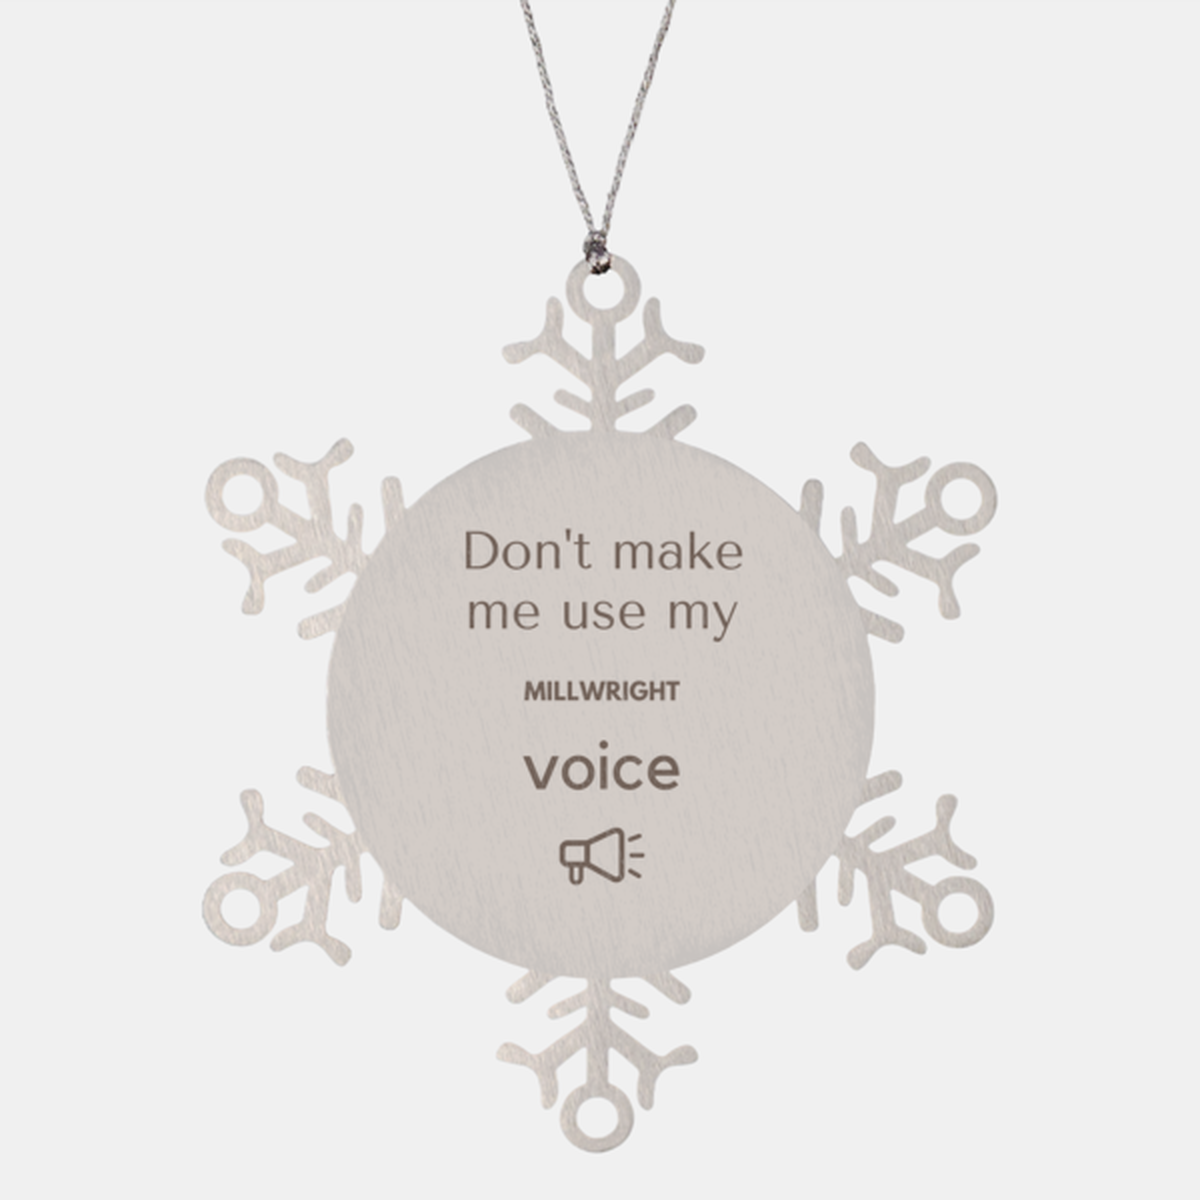 Don't make me use my Millwright voice, Sarcasm Millwright Ornament Gifts, Christmas Millwright Snowflake Ornament Unique Gifts For Millwright Coworkers, Men, Women, Colleague, Friends